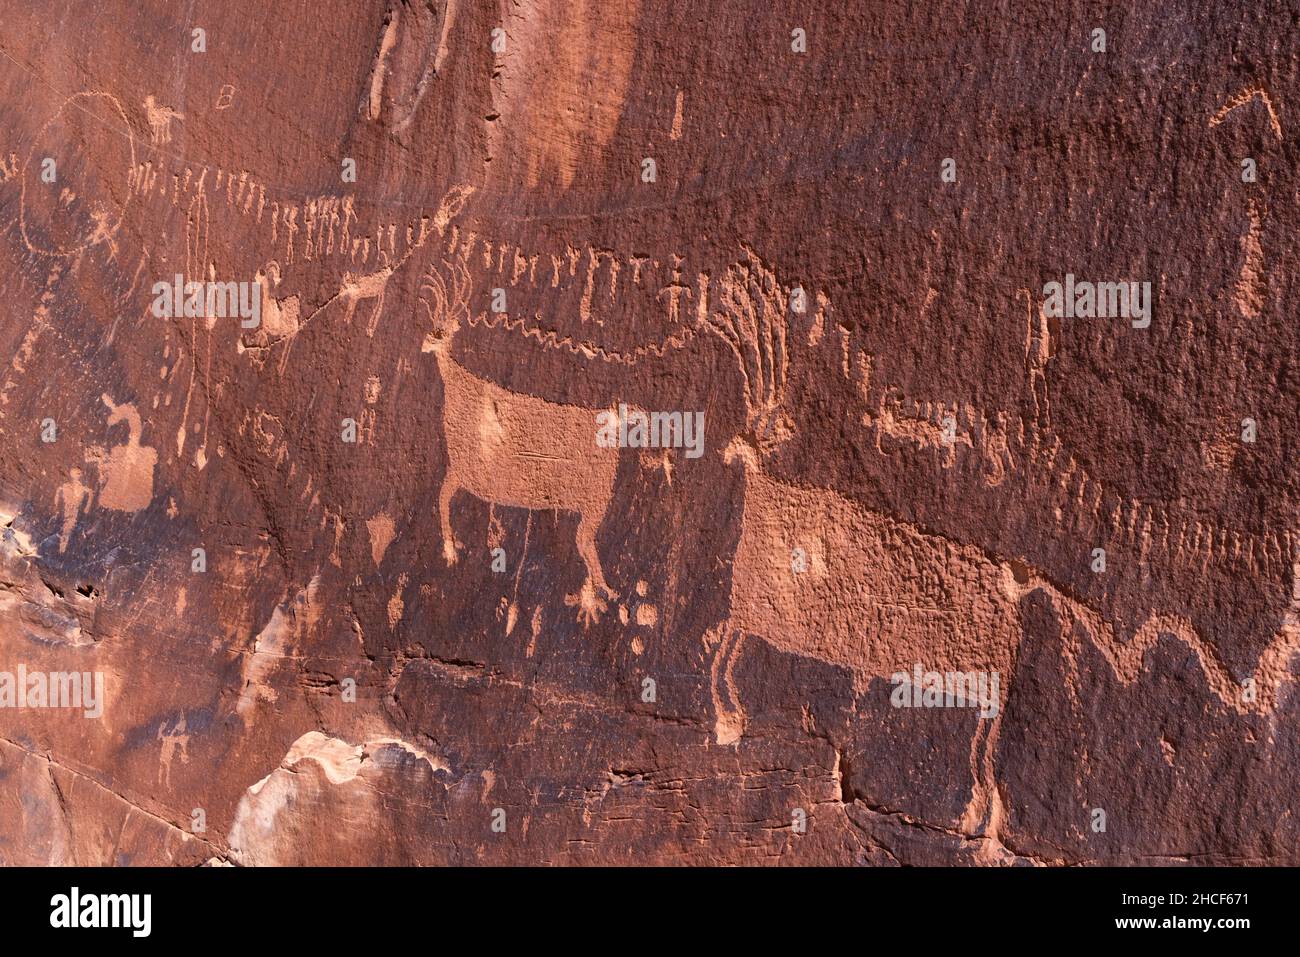 The Procession Panel, a well-known Ancetral Puebloan petroglyph panel near the top of Comb Ridge in Bears Ears National Monument, Utah. Stock Photo